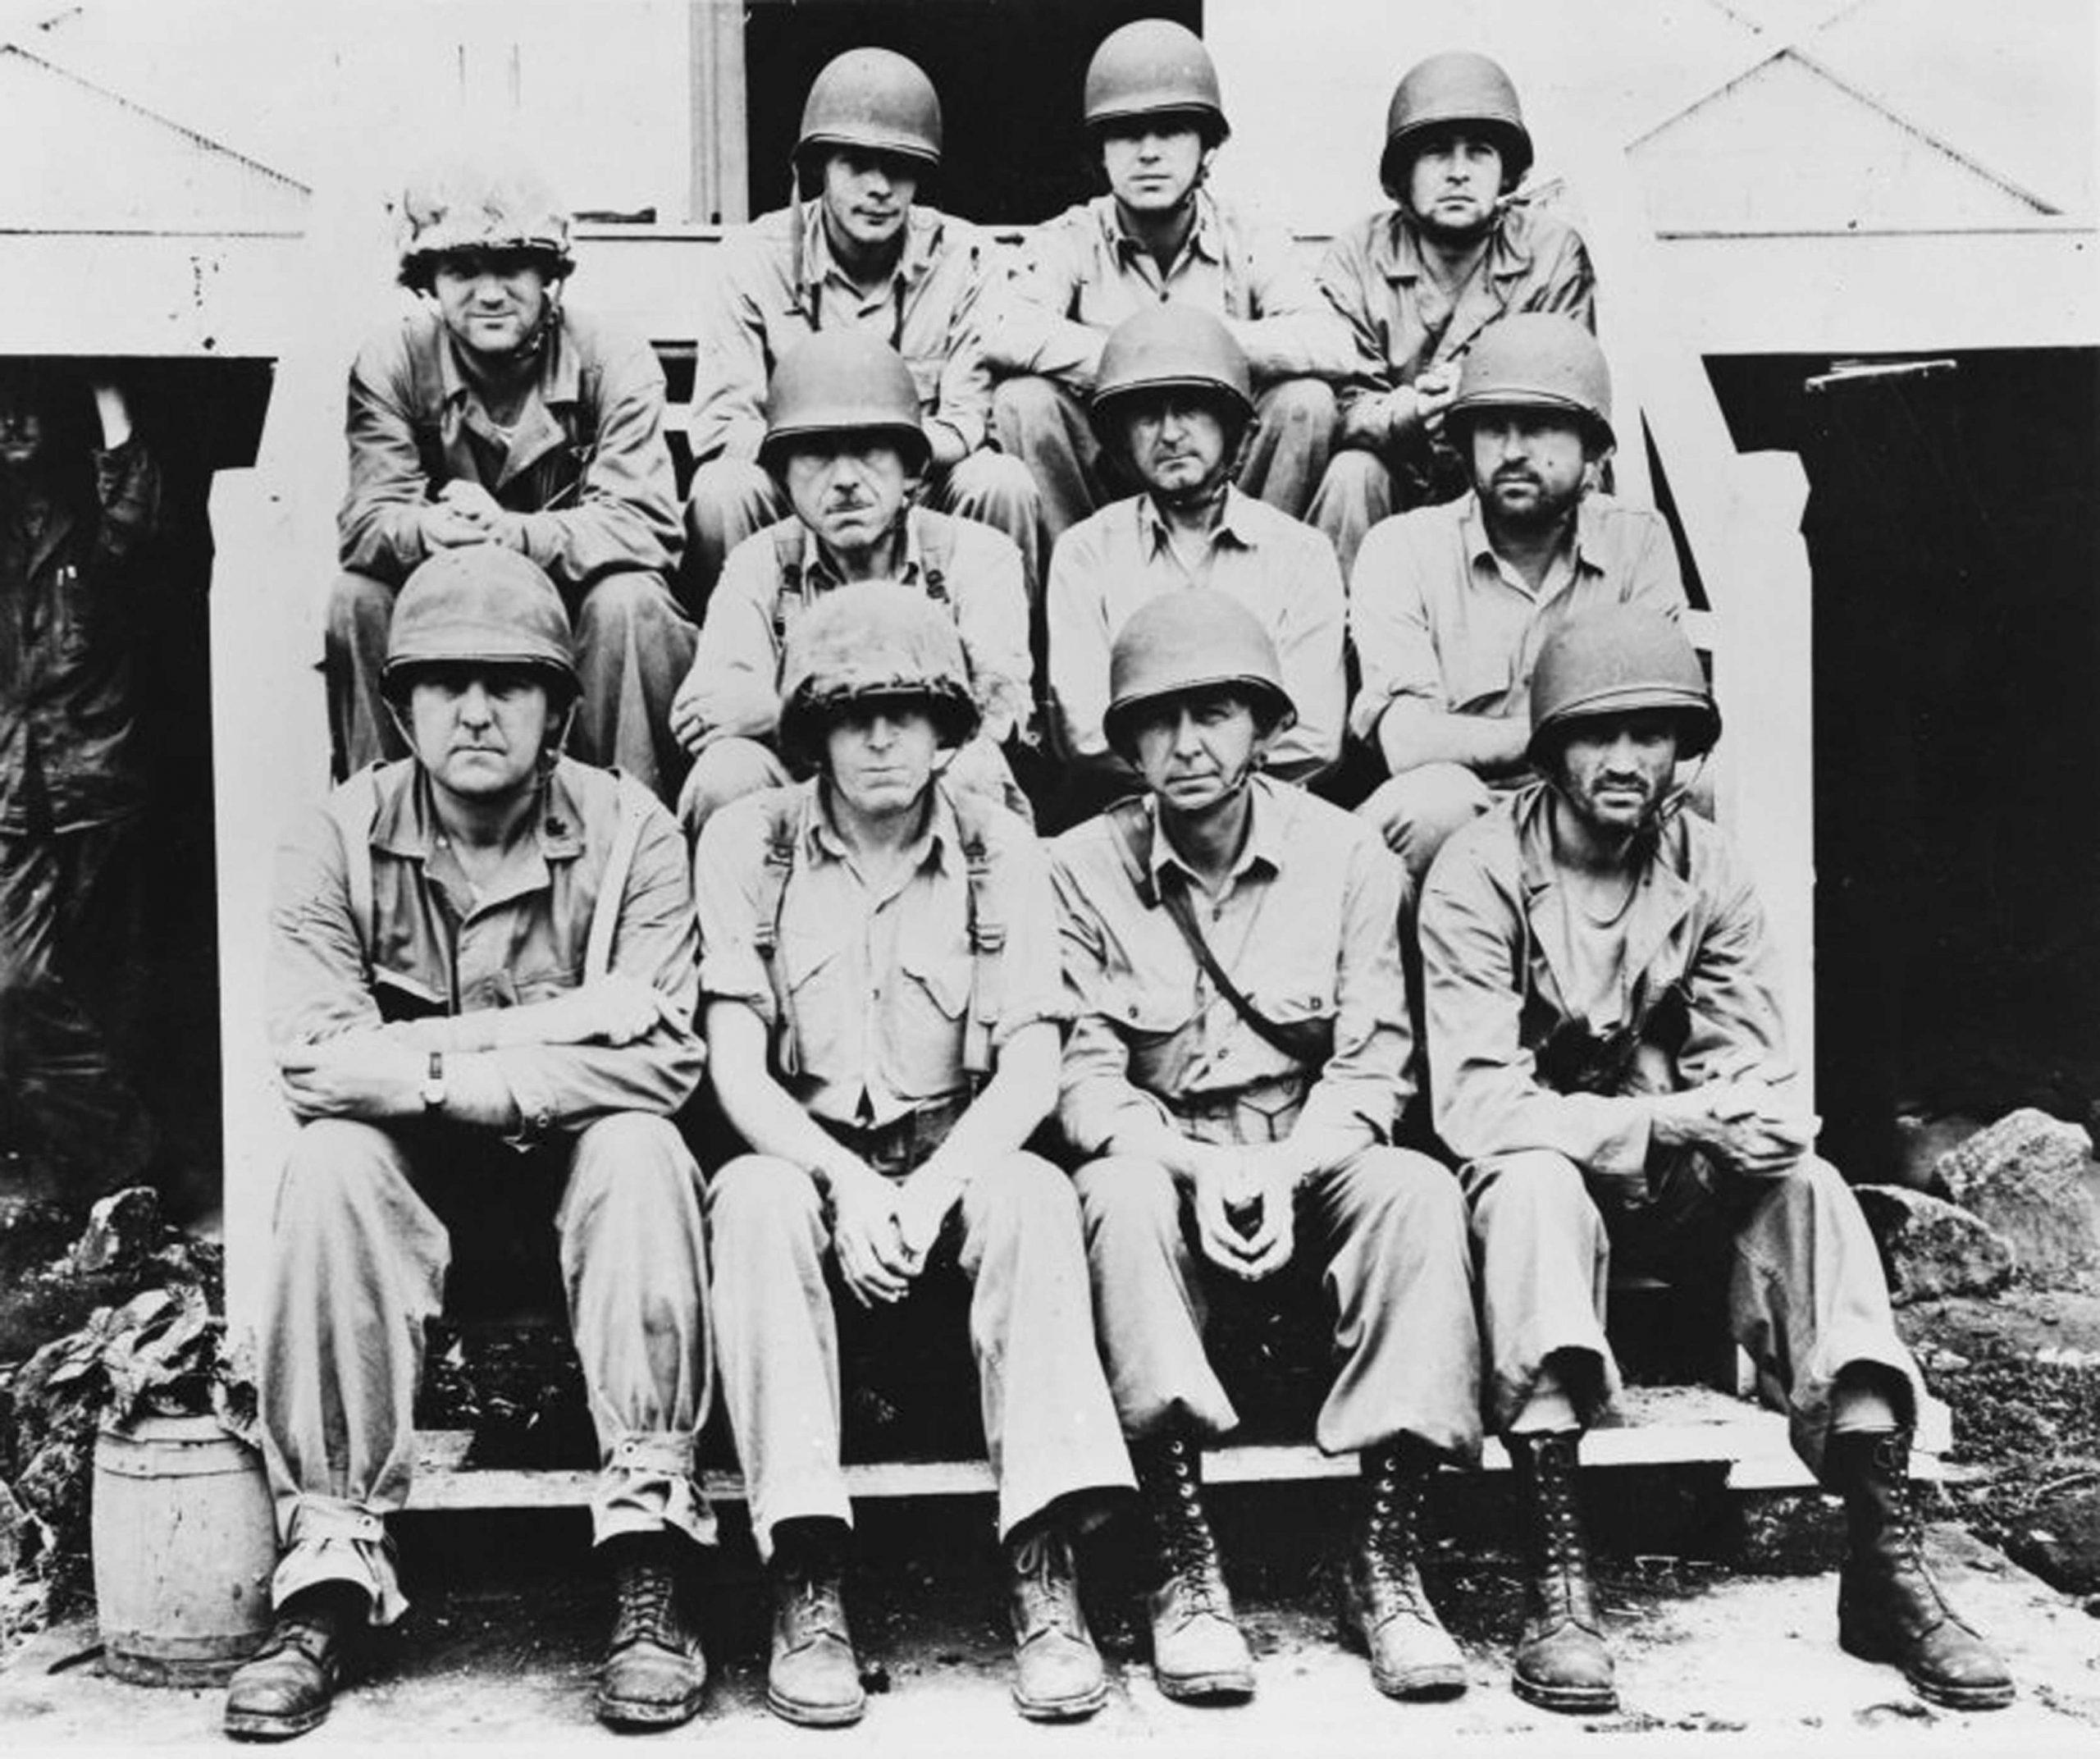 Group photo of American Marines